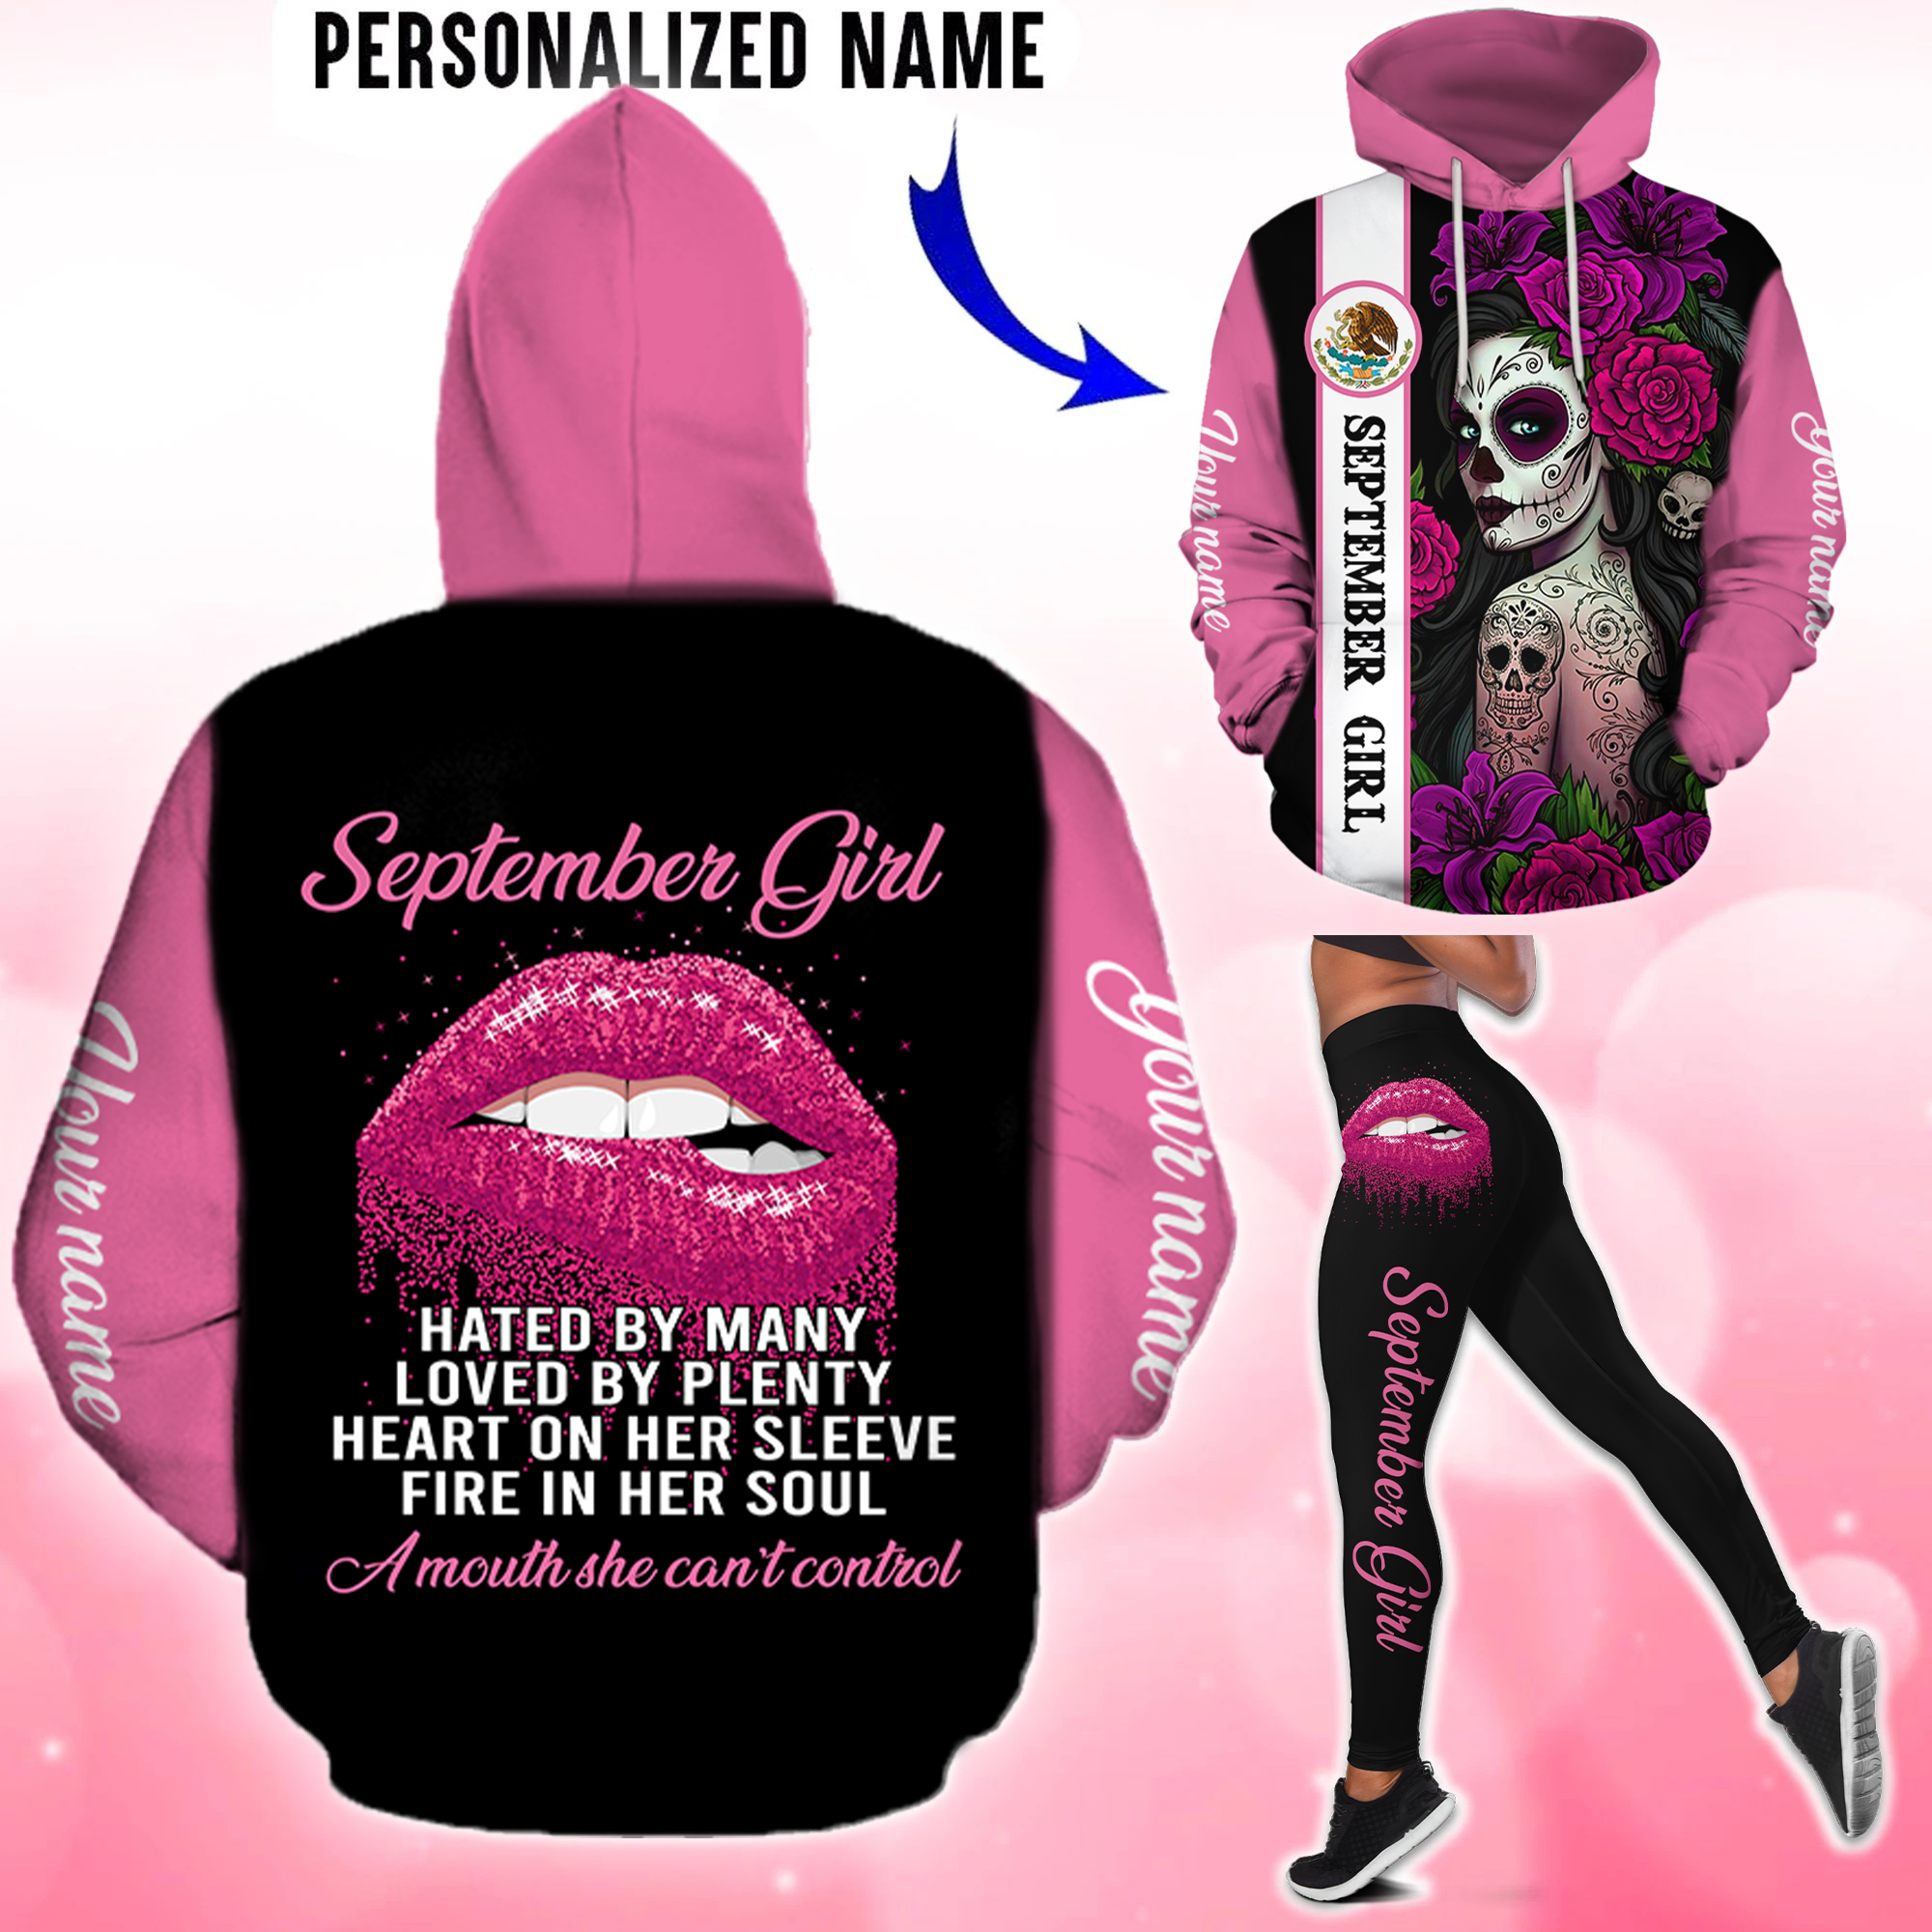 September Girl Customize Name 3D All Over Printed Shirts For Women MH10112009